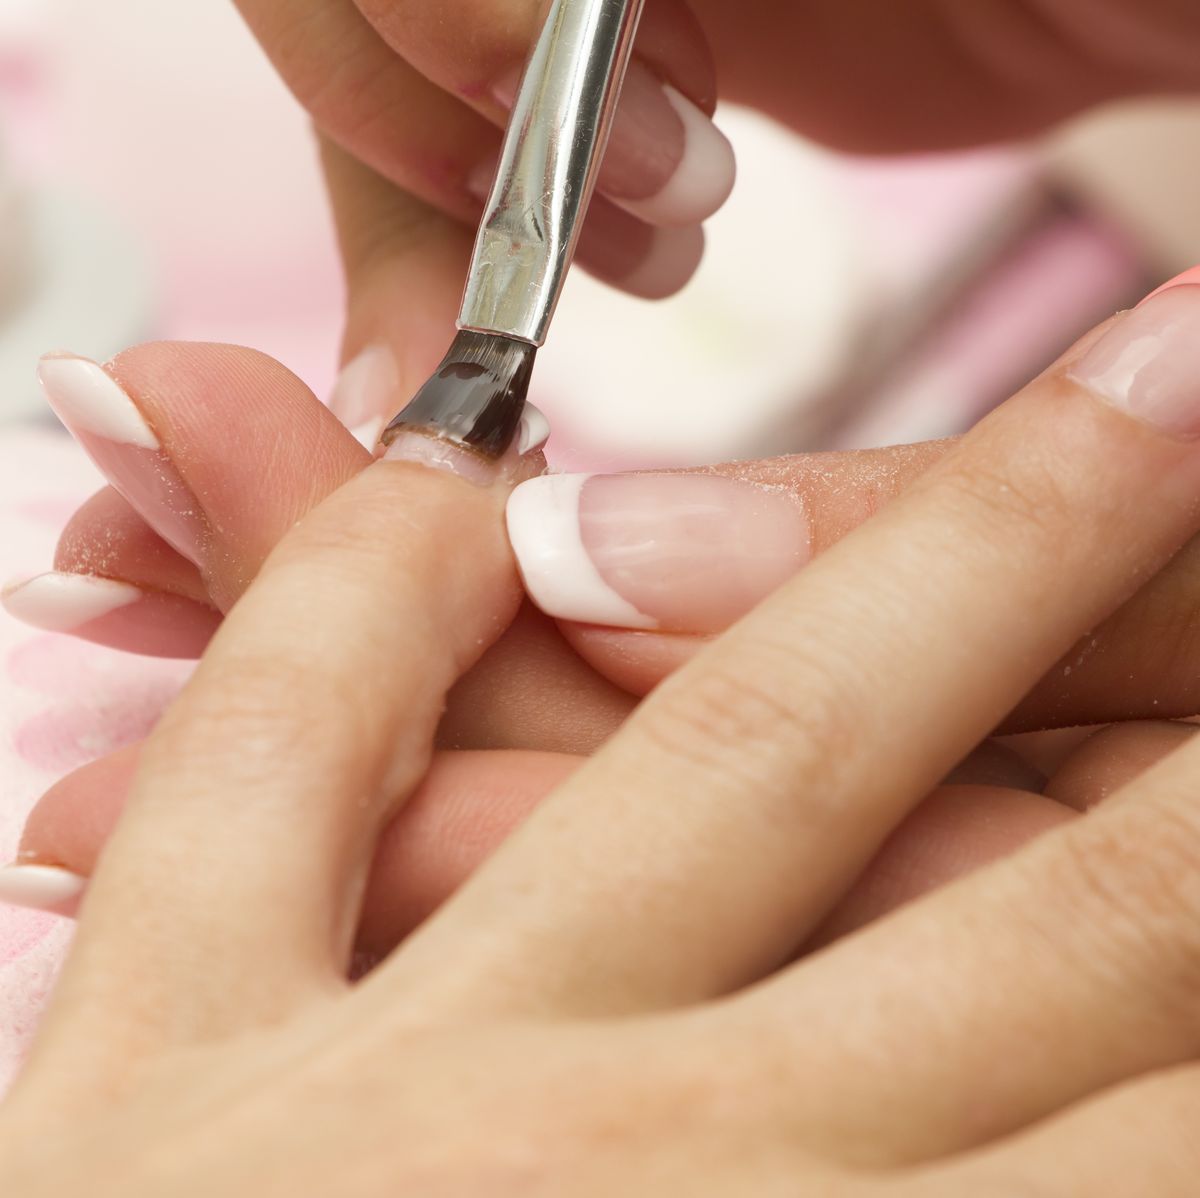 Beginner Nail Tech, How To Shape Nails